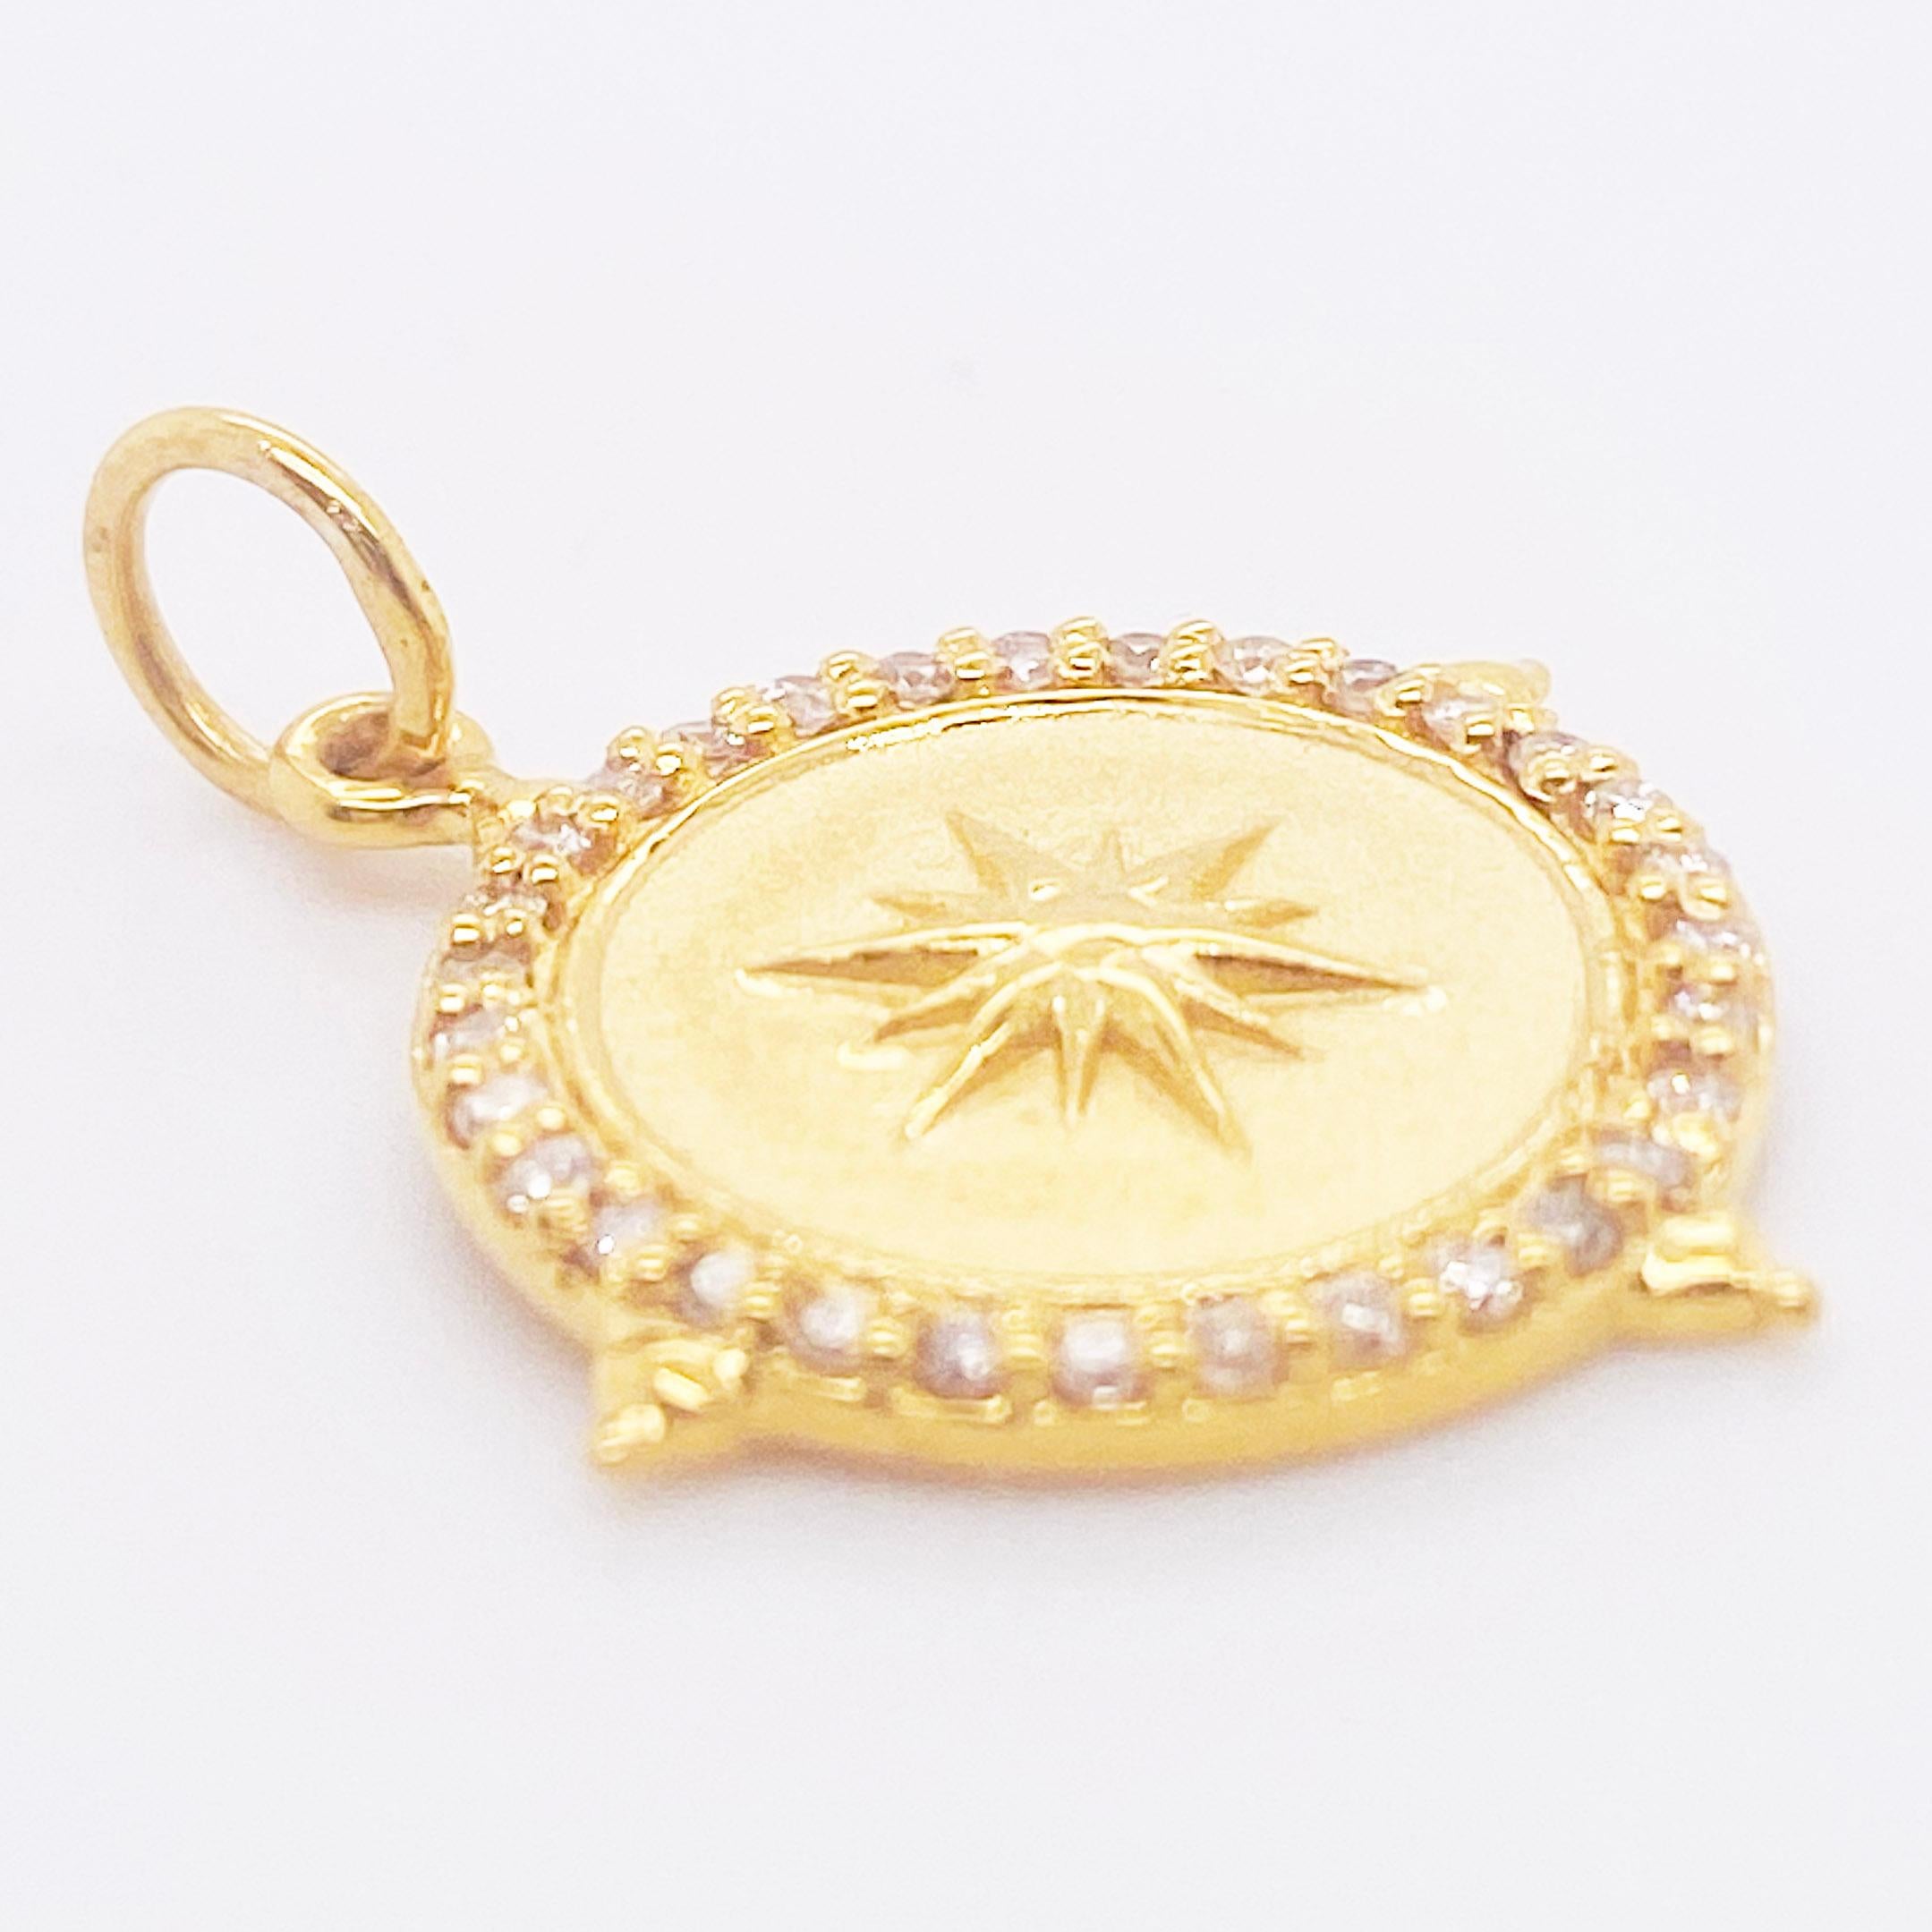 The details for this gorgeous charm are listed below:
Metal Quality: 14K Yellow Gold
Charm Type: North Star Pendant
Charm Measurements: 17 Millimeters x 18 Millimeters
Diamond Number: 31
Diamond Shape: Round Brilliant
Diamond Clarity: VS2